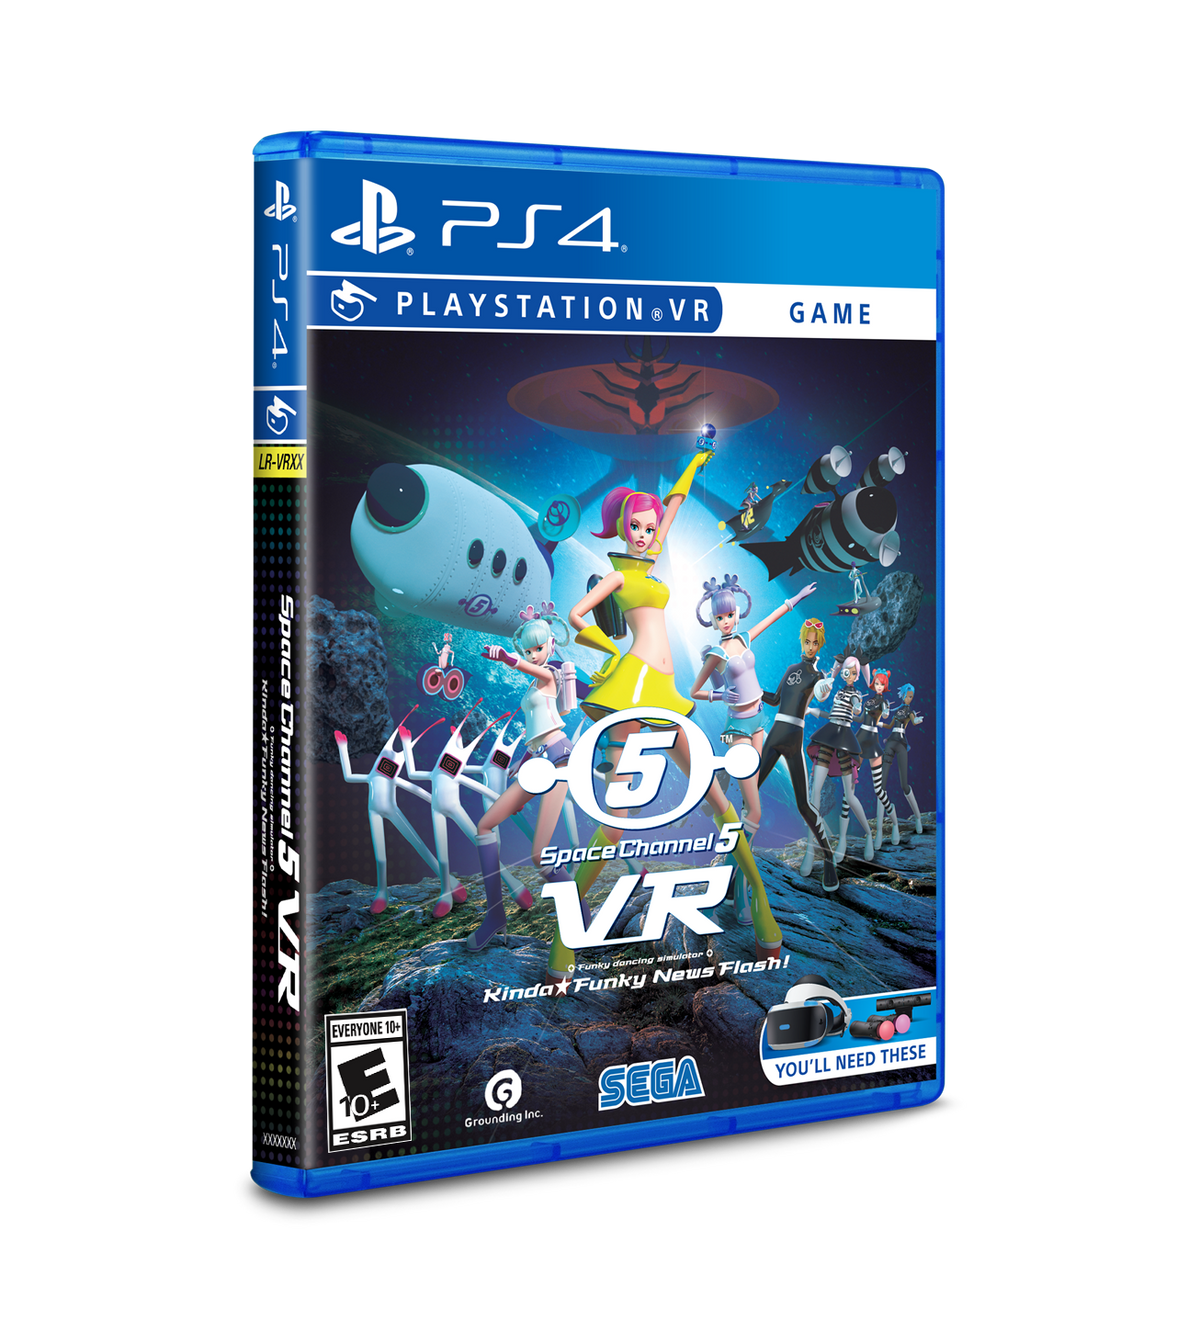 Limited Run #353: Space Channel 5 VR Kinda Funky News Flash! (PS4)